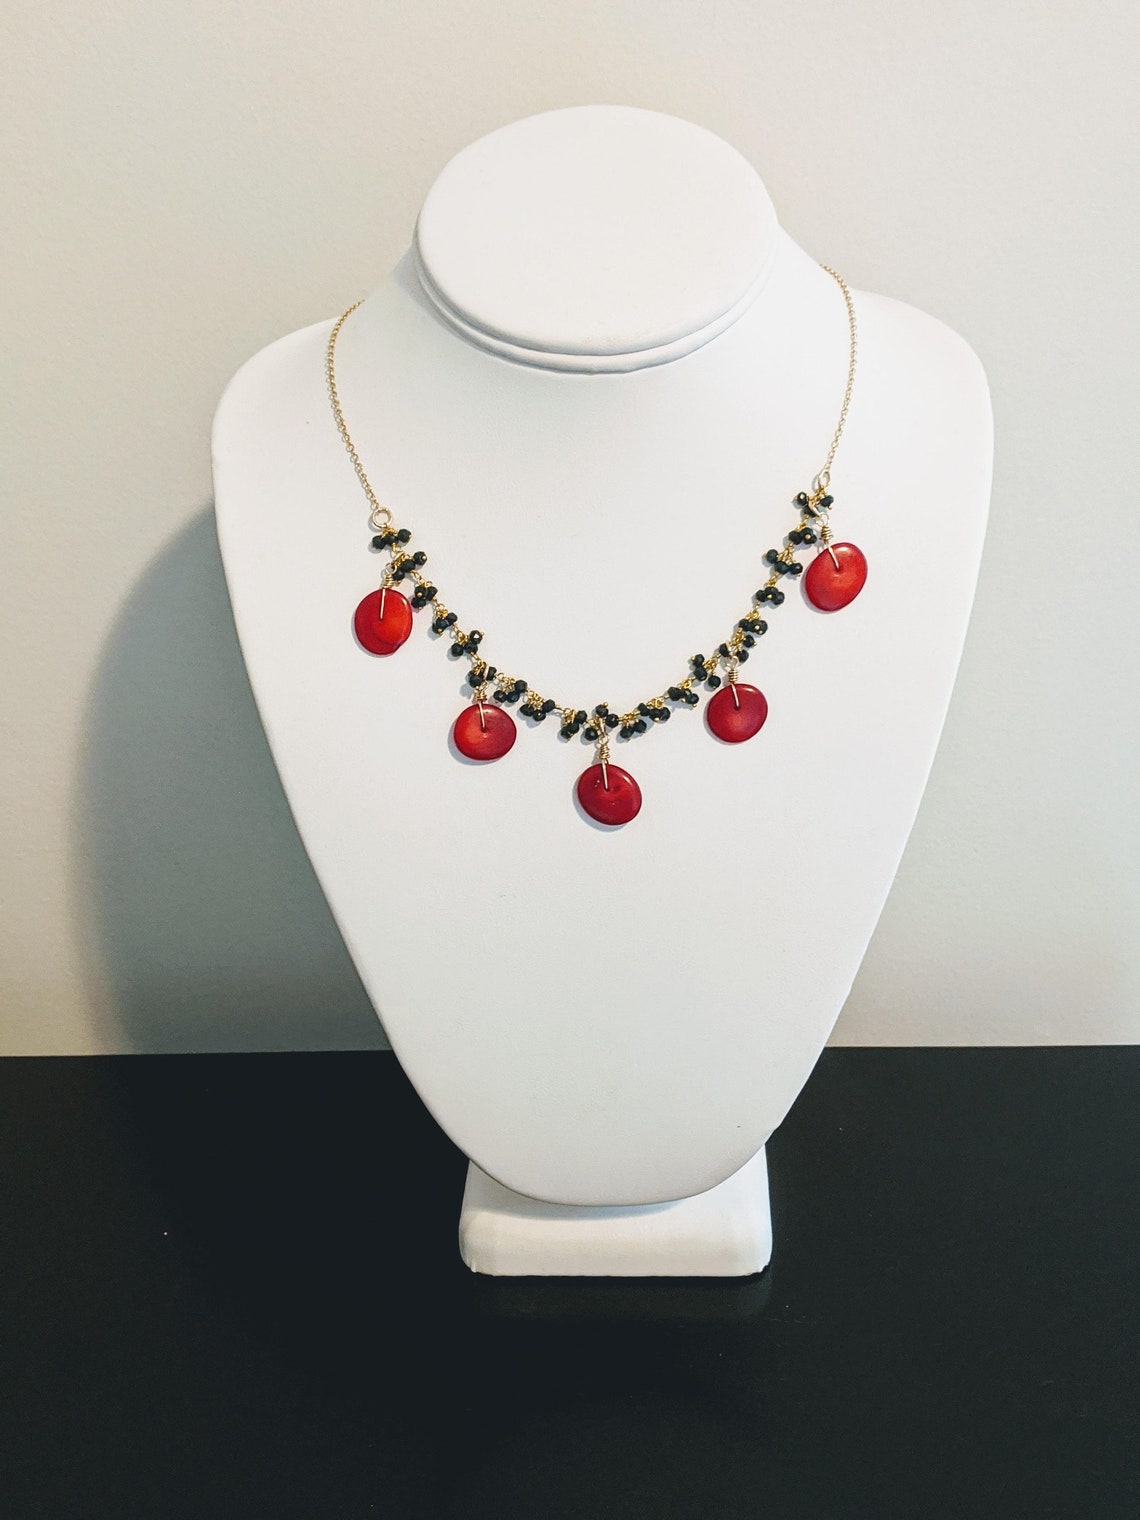 Red and Black Gemstones on Gold Necklace - Etsy